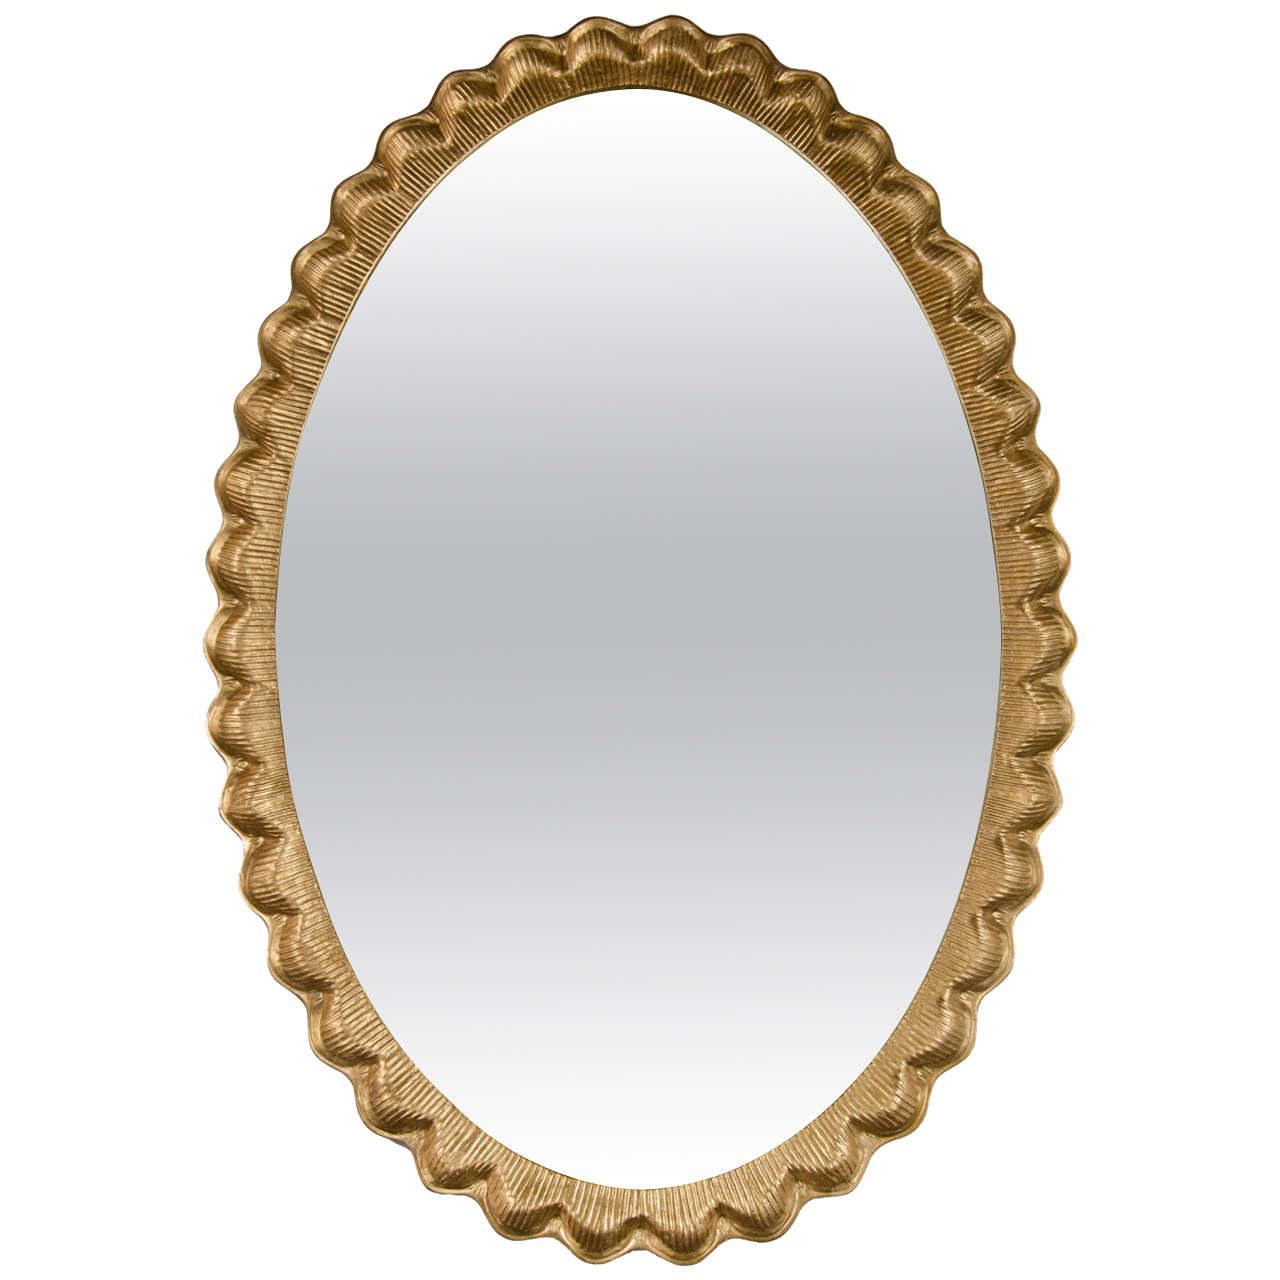 Exceptional Mid-Century Modernist Ovoid Scalloped Mirror by Dorothy Draper